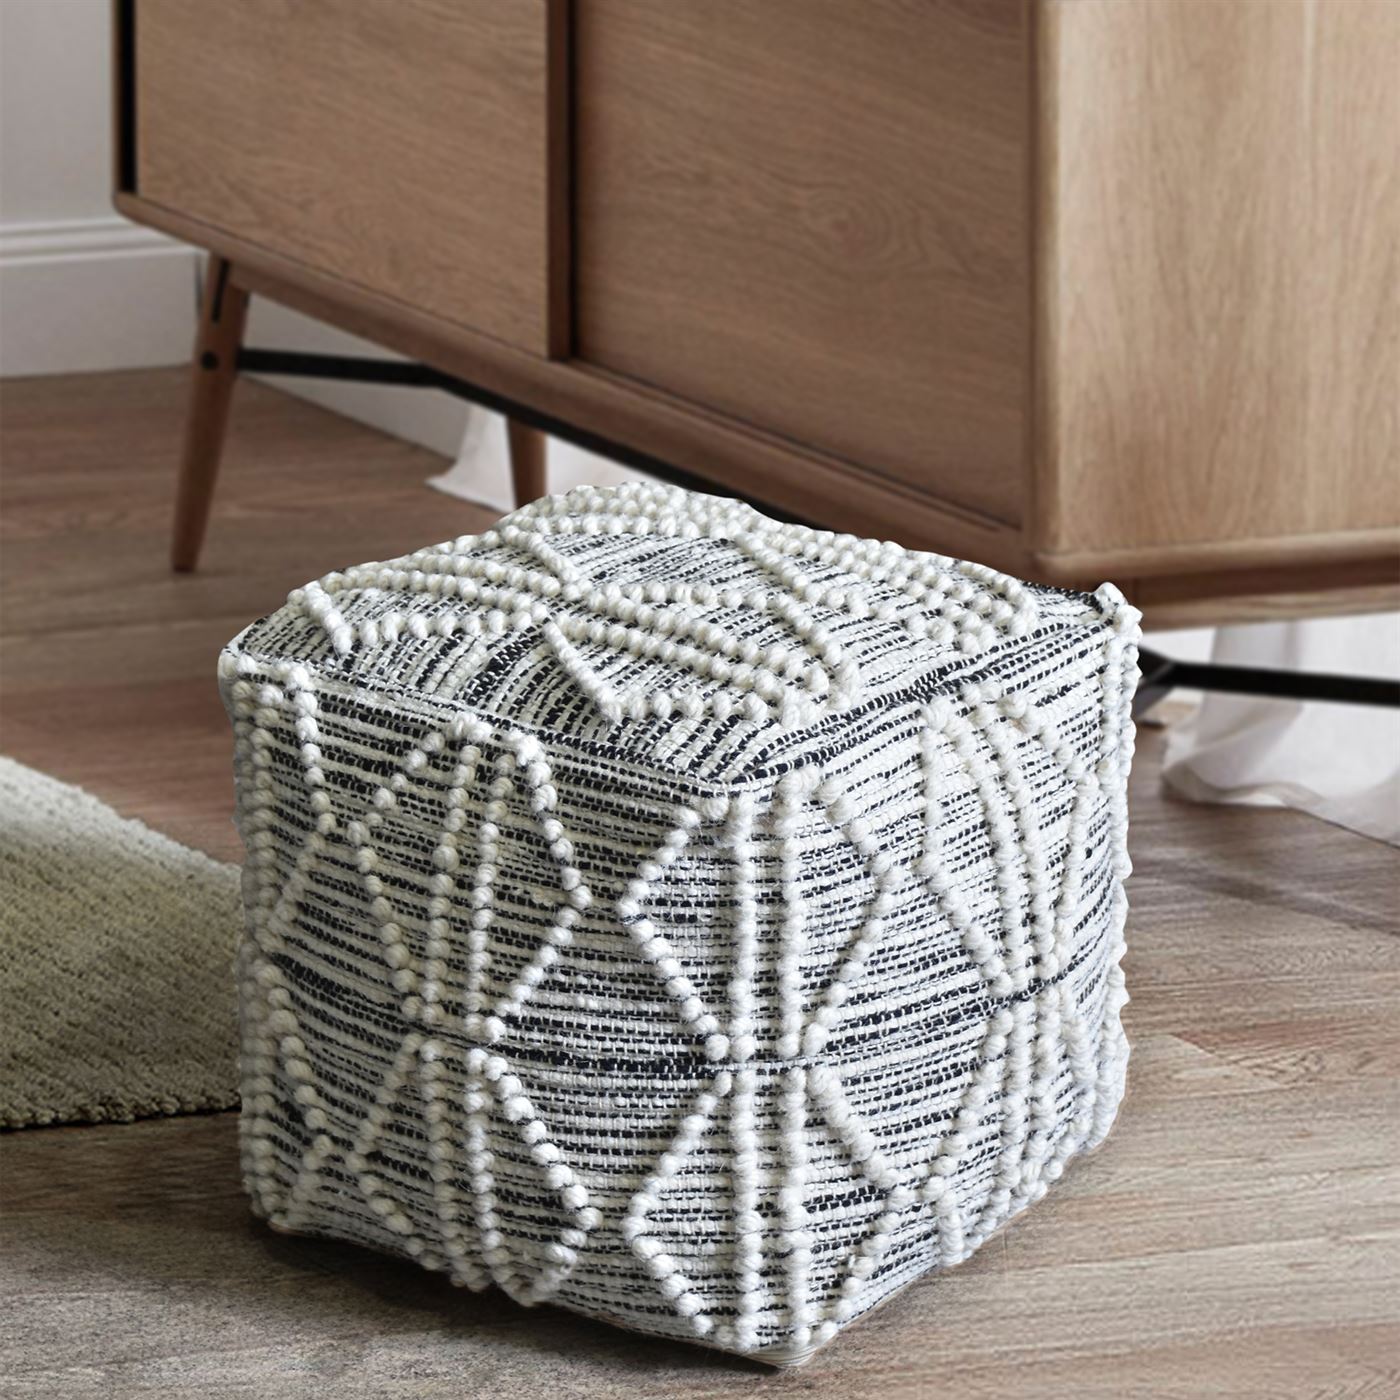 Sentir Pouf, Wool/ Cotton, Natural White/Charcoal, Pitloom, All Loop 